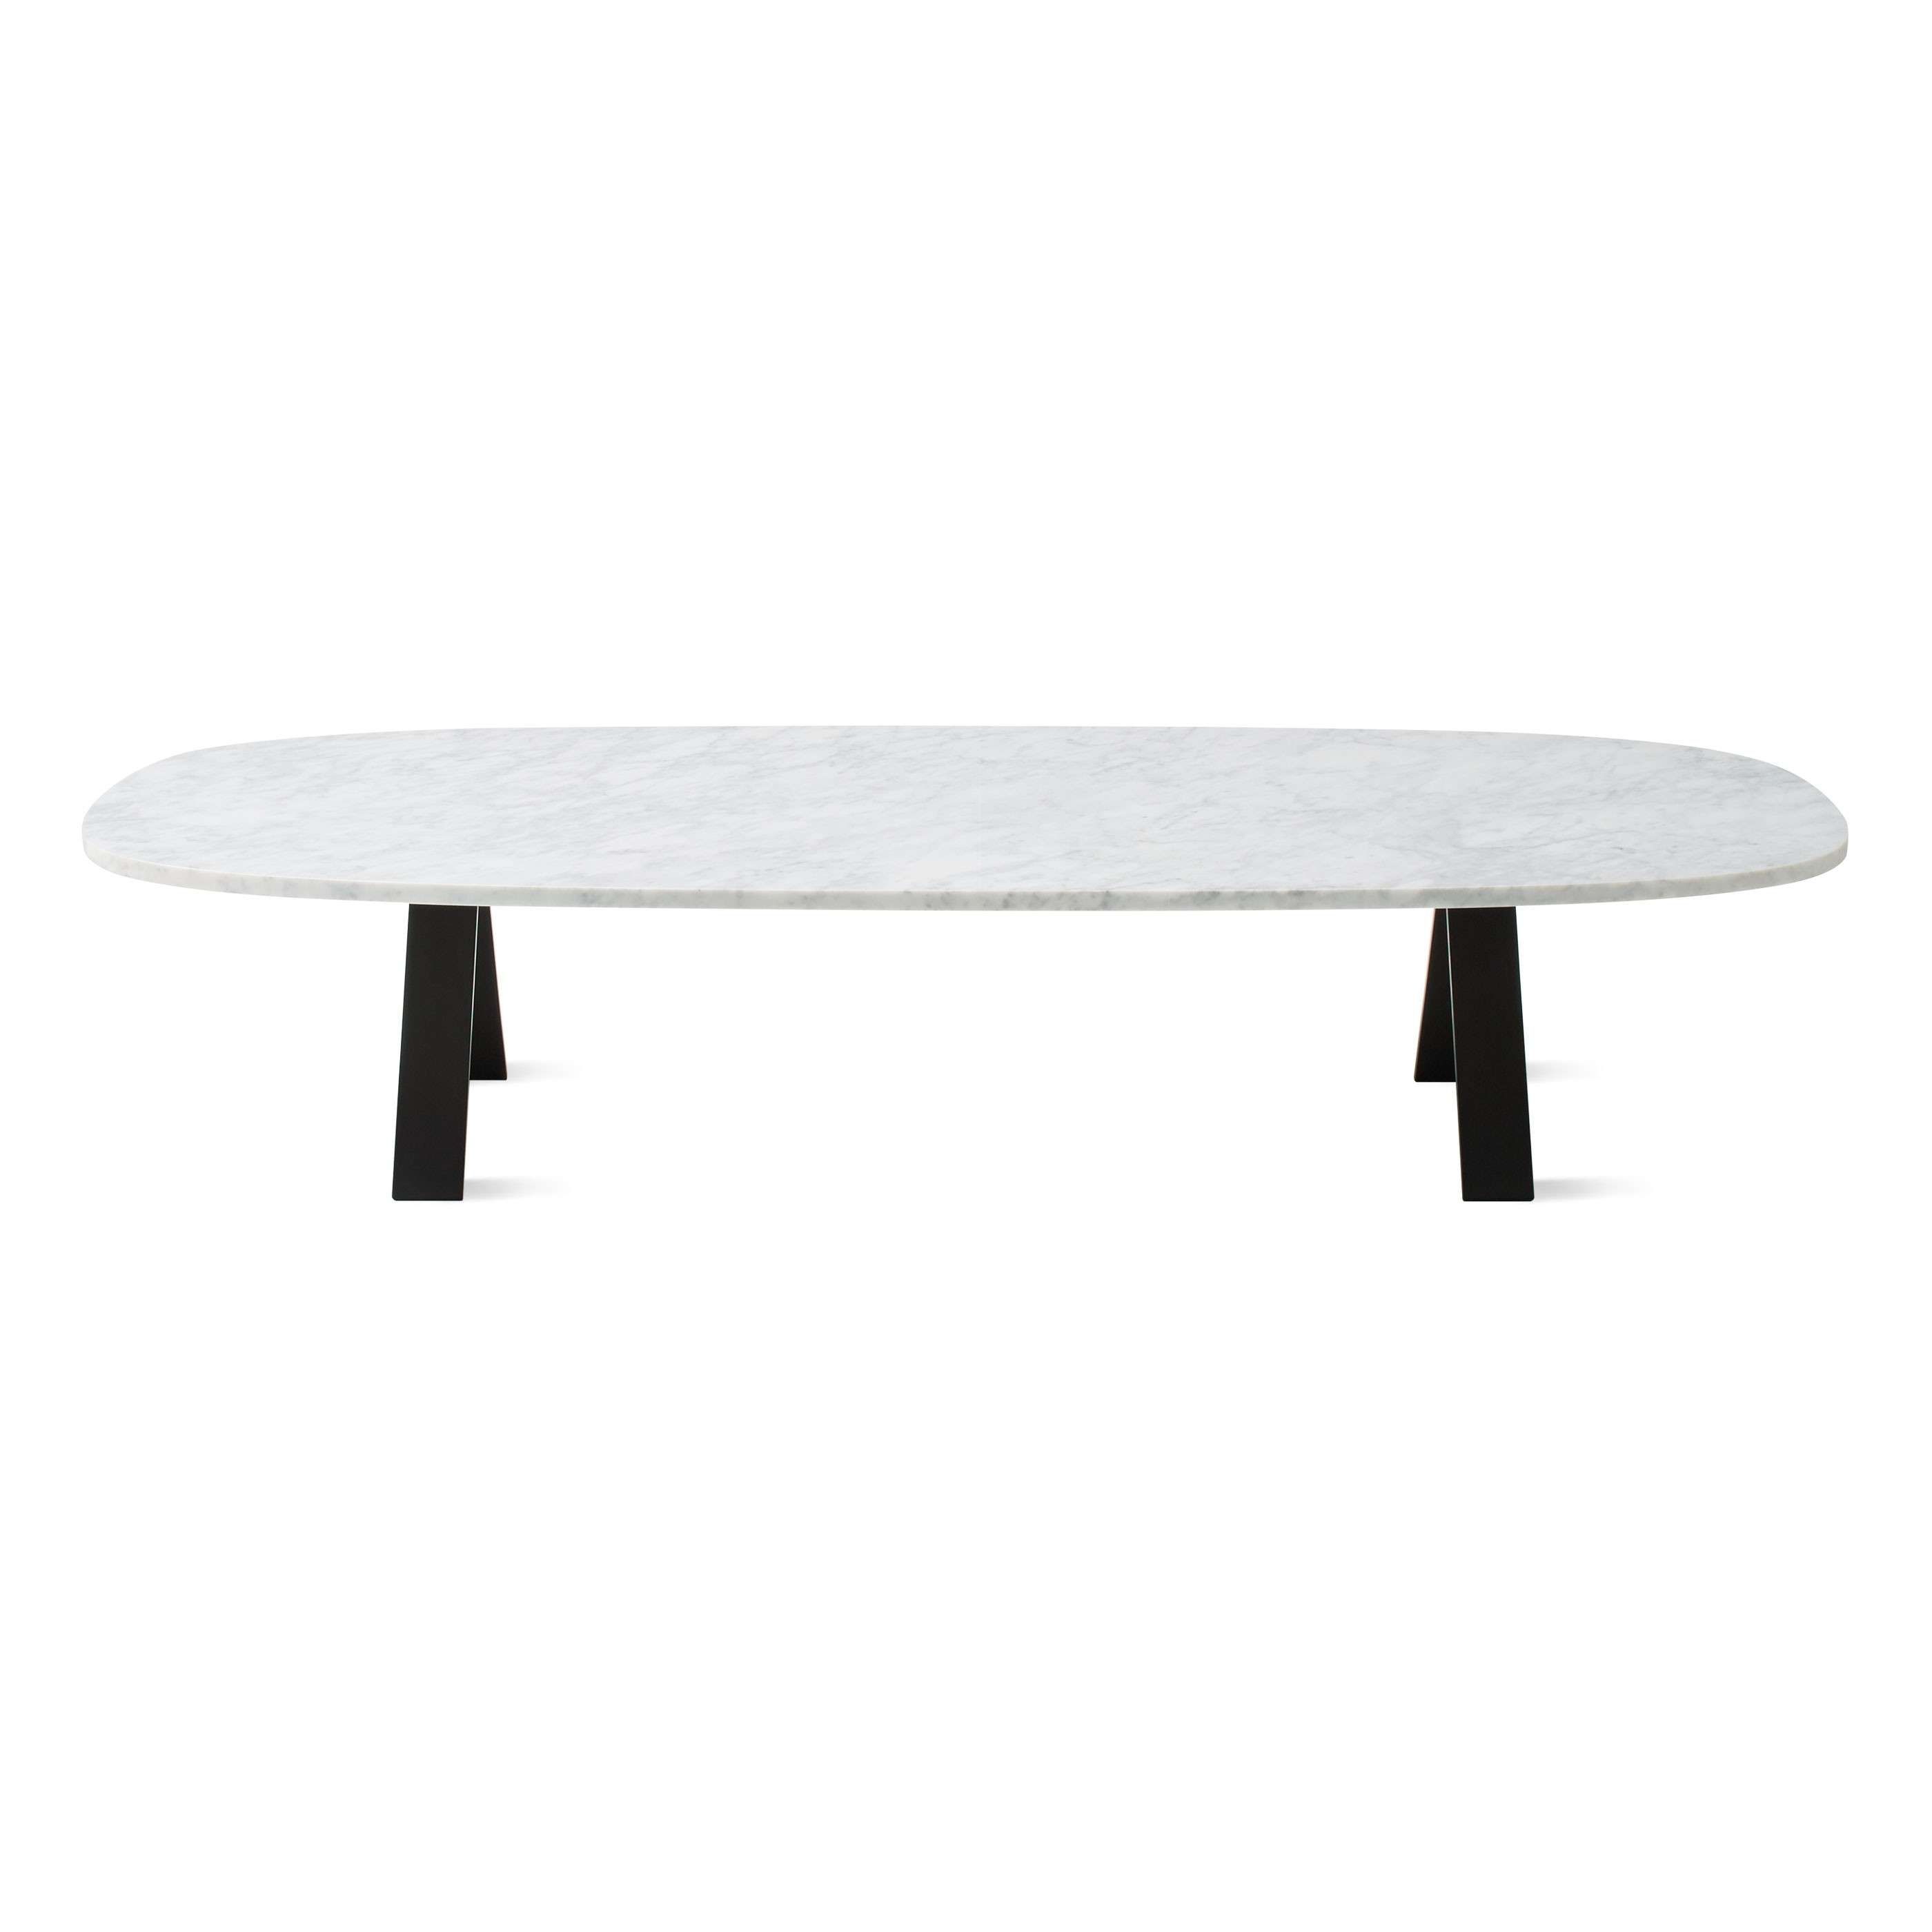 Blu Dot Throughout Well Known Black Oval Coffee Tables (View 13 of 20)